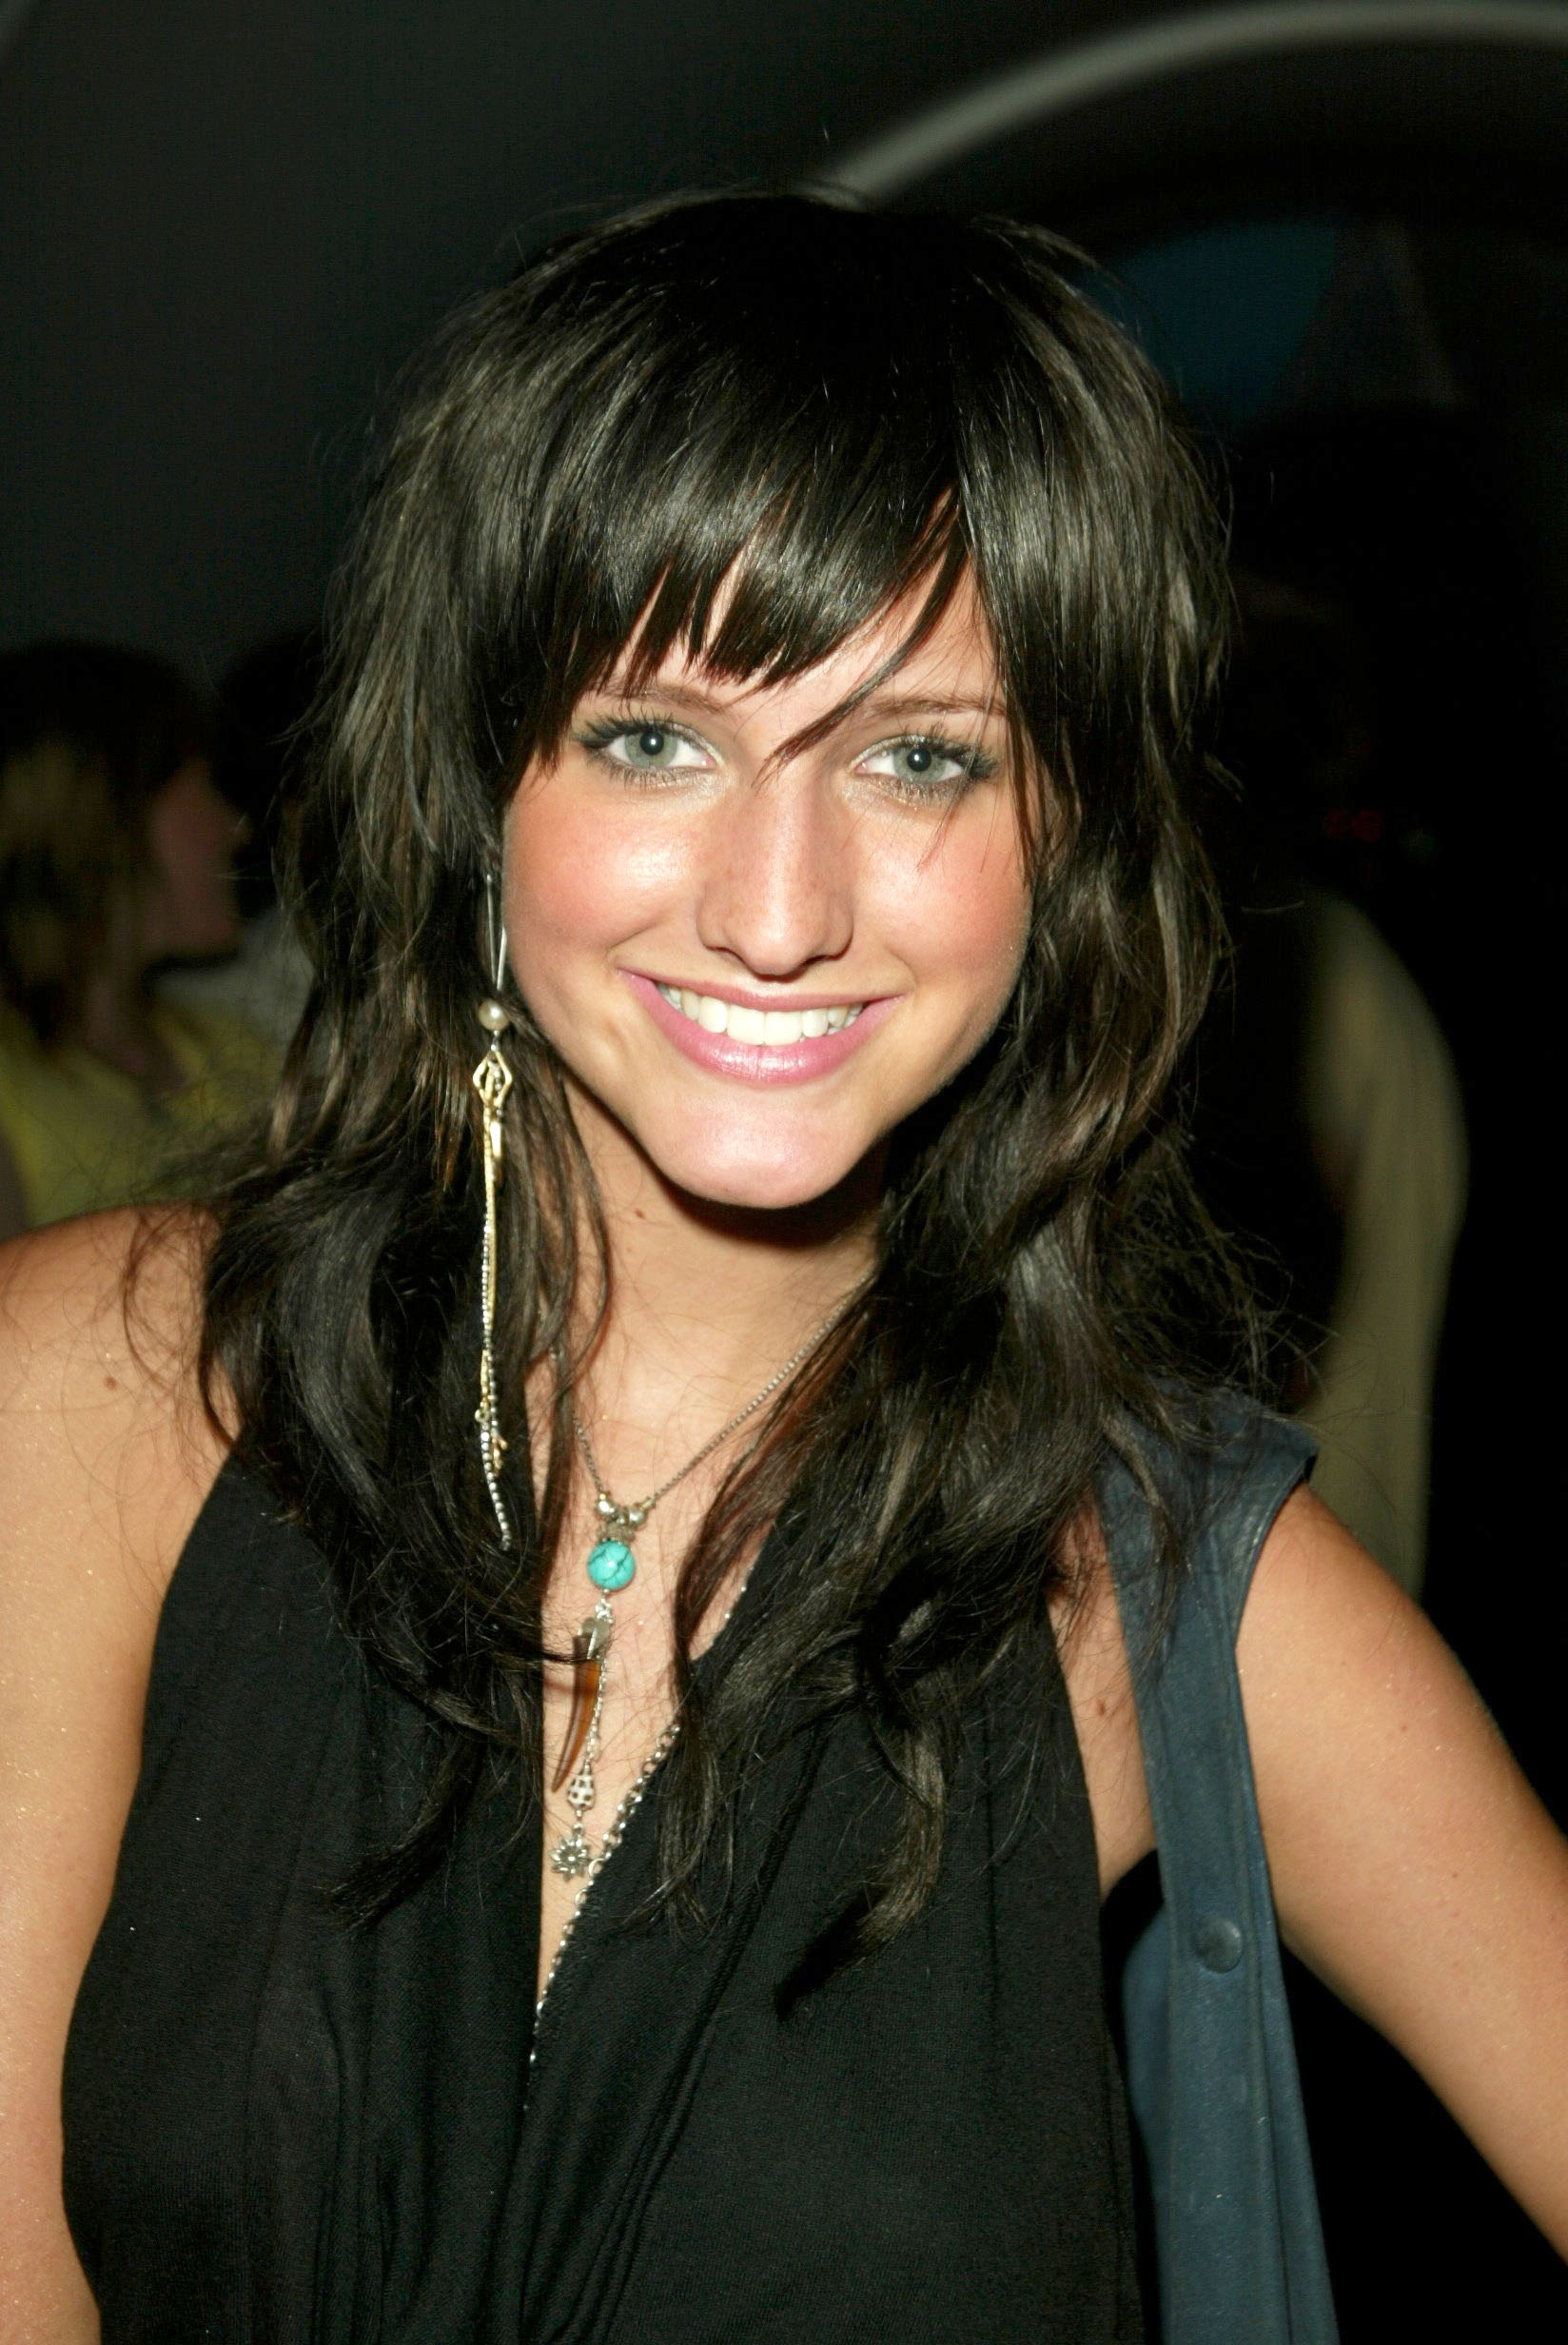 <p>Back in 2004, <a href="https://www.wonderwall.com/celebrity/profiles/overview/ashlee-simpson-237.article">Ashlee Simpson</a> served as a counterpart to big sis Jessica Simpson. She had darker hair, a harder sound and a glorious schnoz. So what became of her nose?</p>